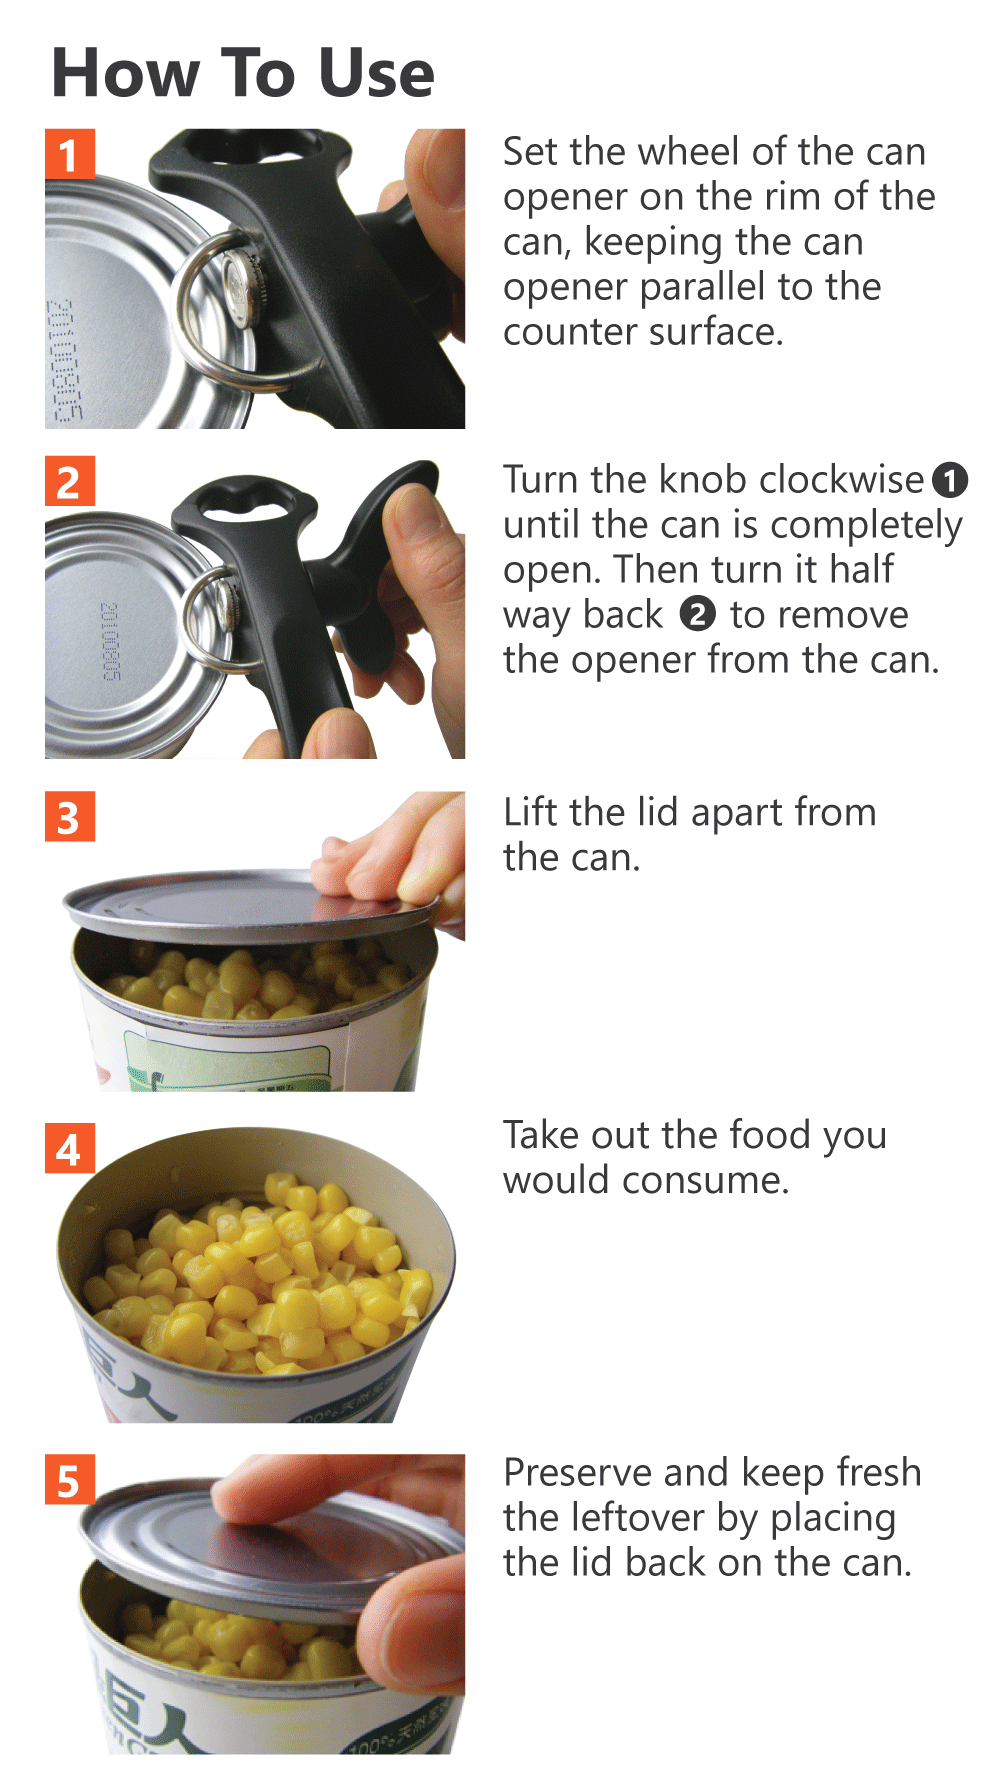 How to use safety can opener